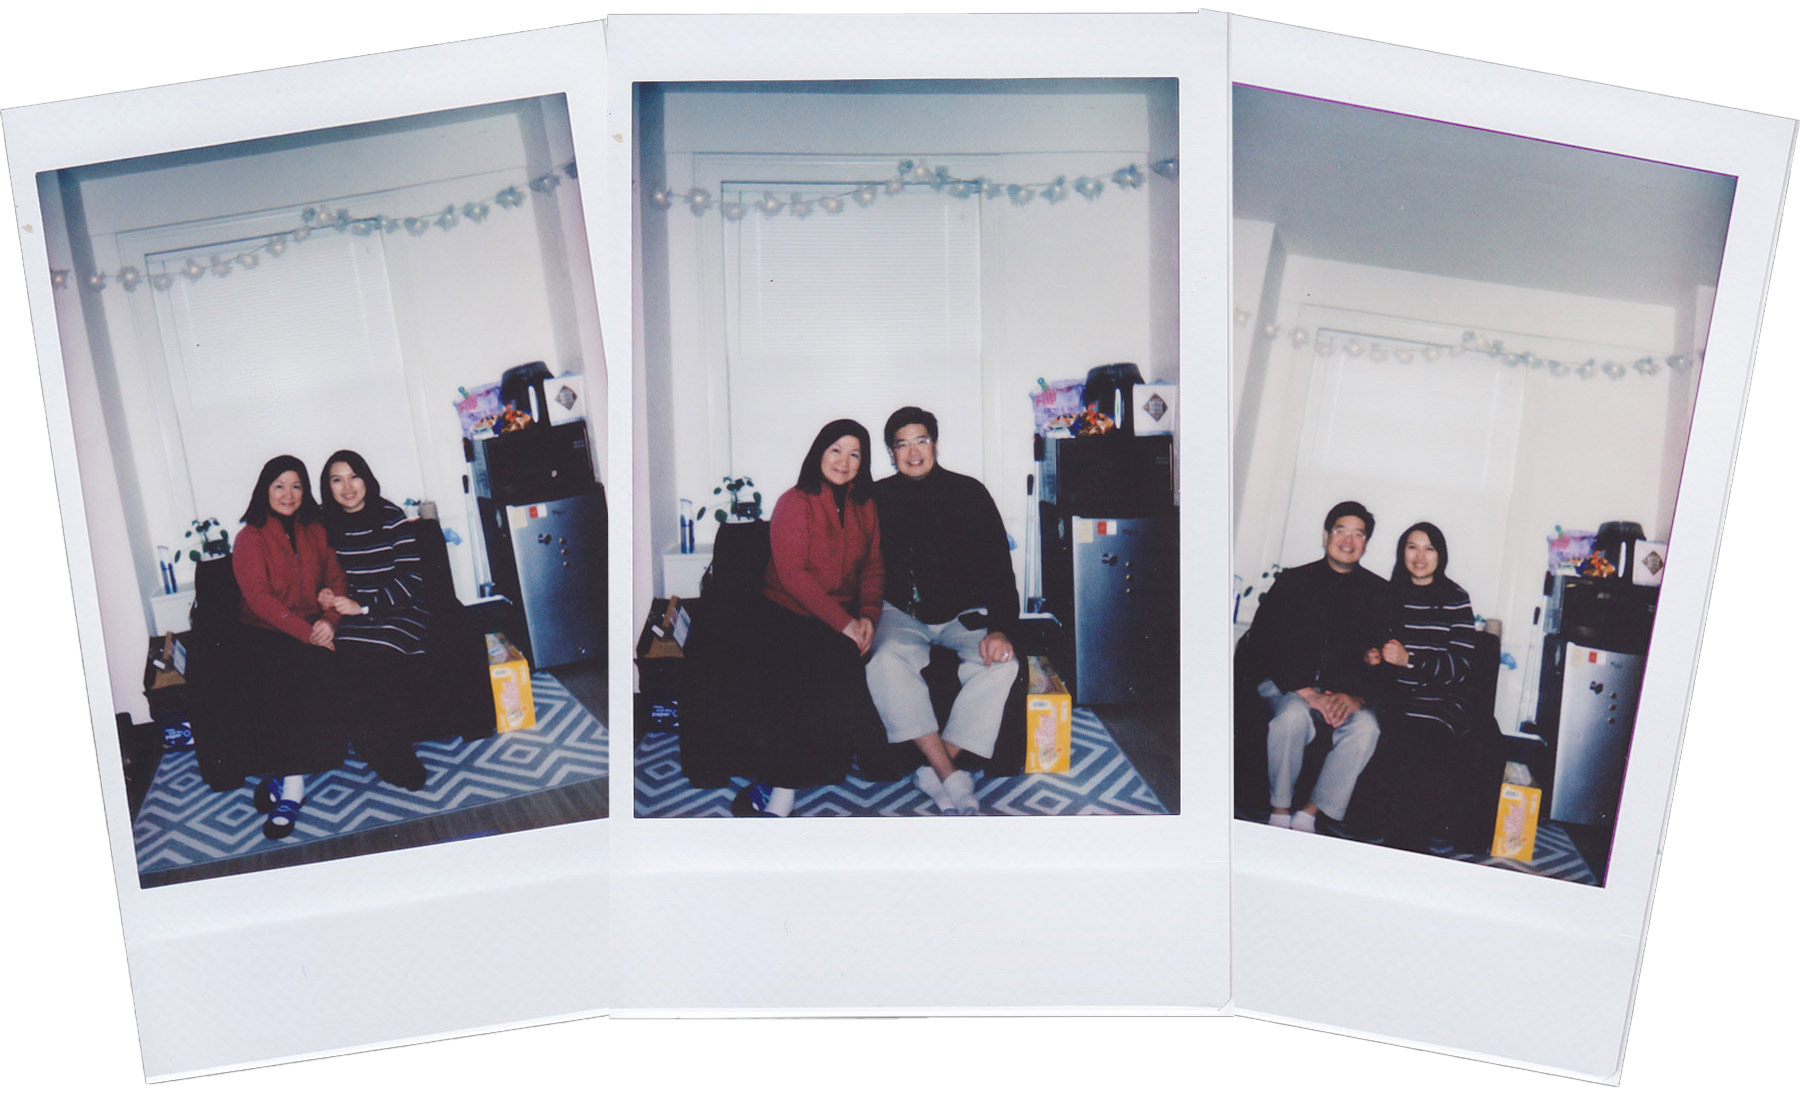 Contributed polaroid images of Karissa Ng, her mother, Julie Zhu, and father, Jerry Ng.